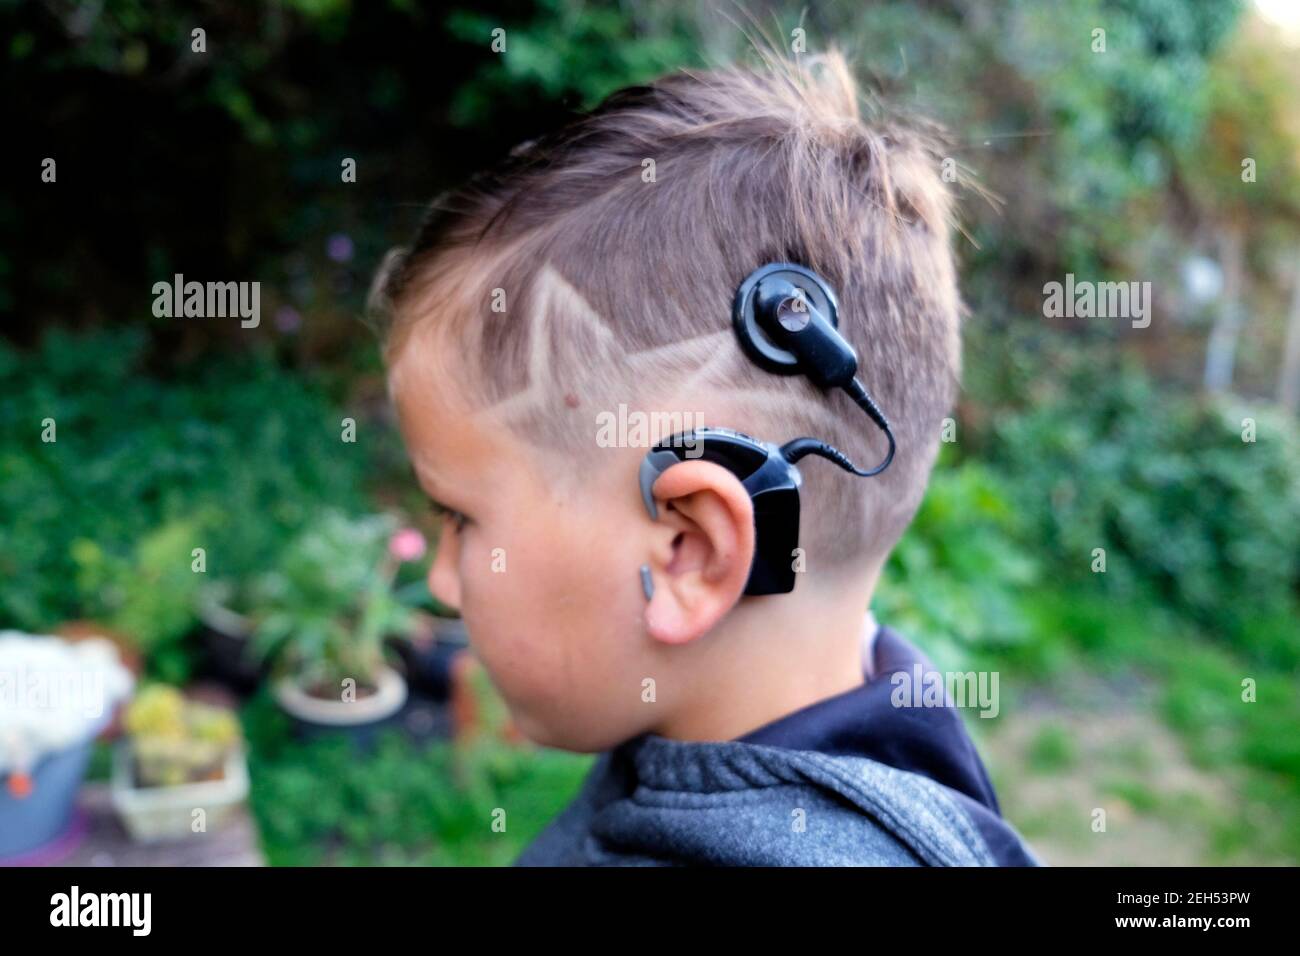 Cool star shape hairstyle on deaf boy child 8 with cochlear implant implants side view profile outside in garden Wales UK Britain   KATHY DEWITT Stock Photo